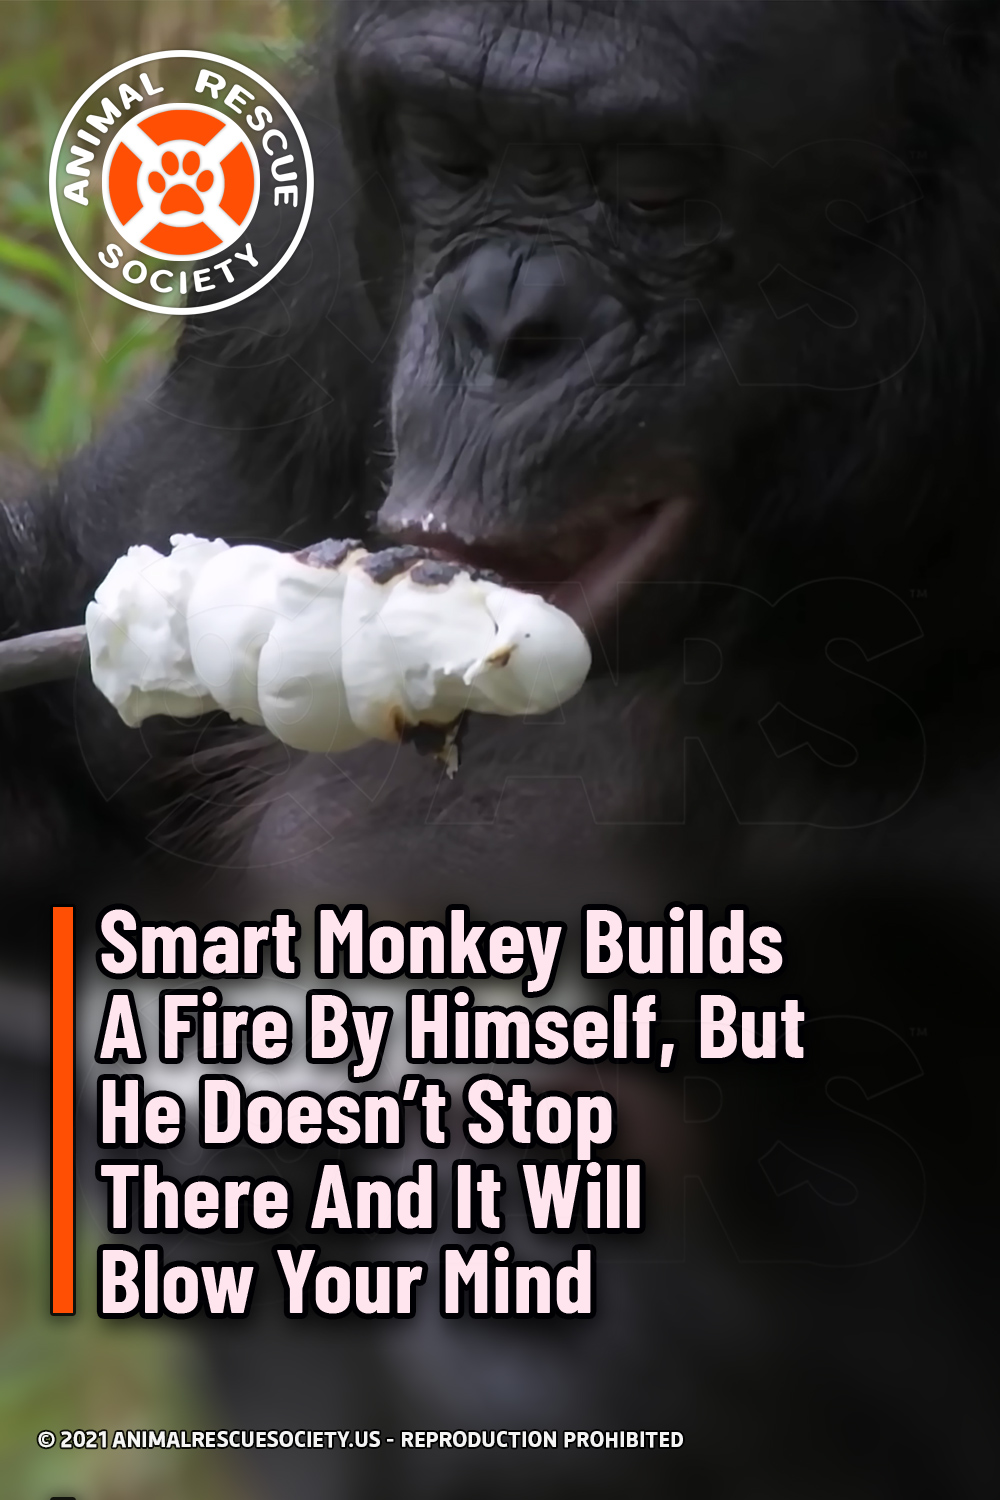 Smart Monkey Builds A Fire By Himself, But He Doesn’t Stop There And It Will Blow Your Mind